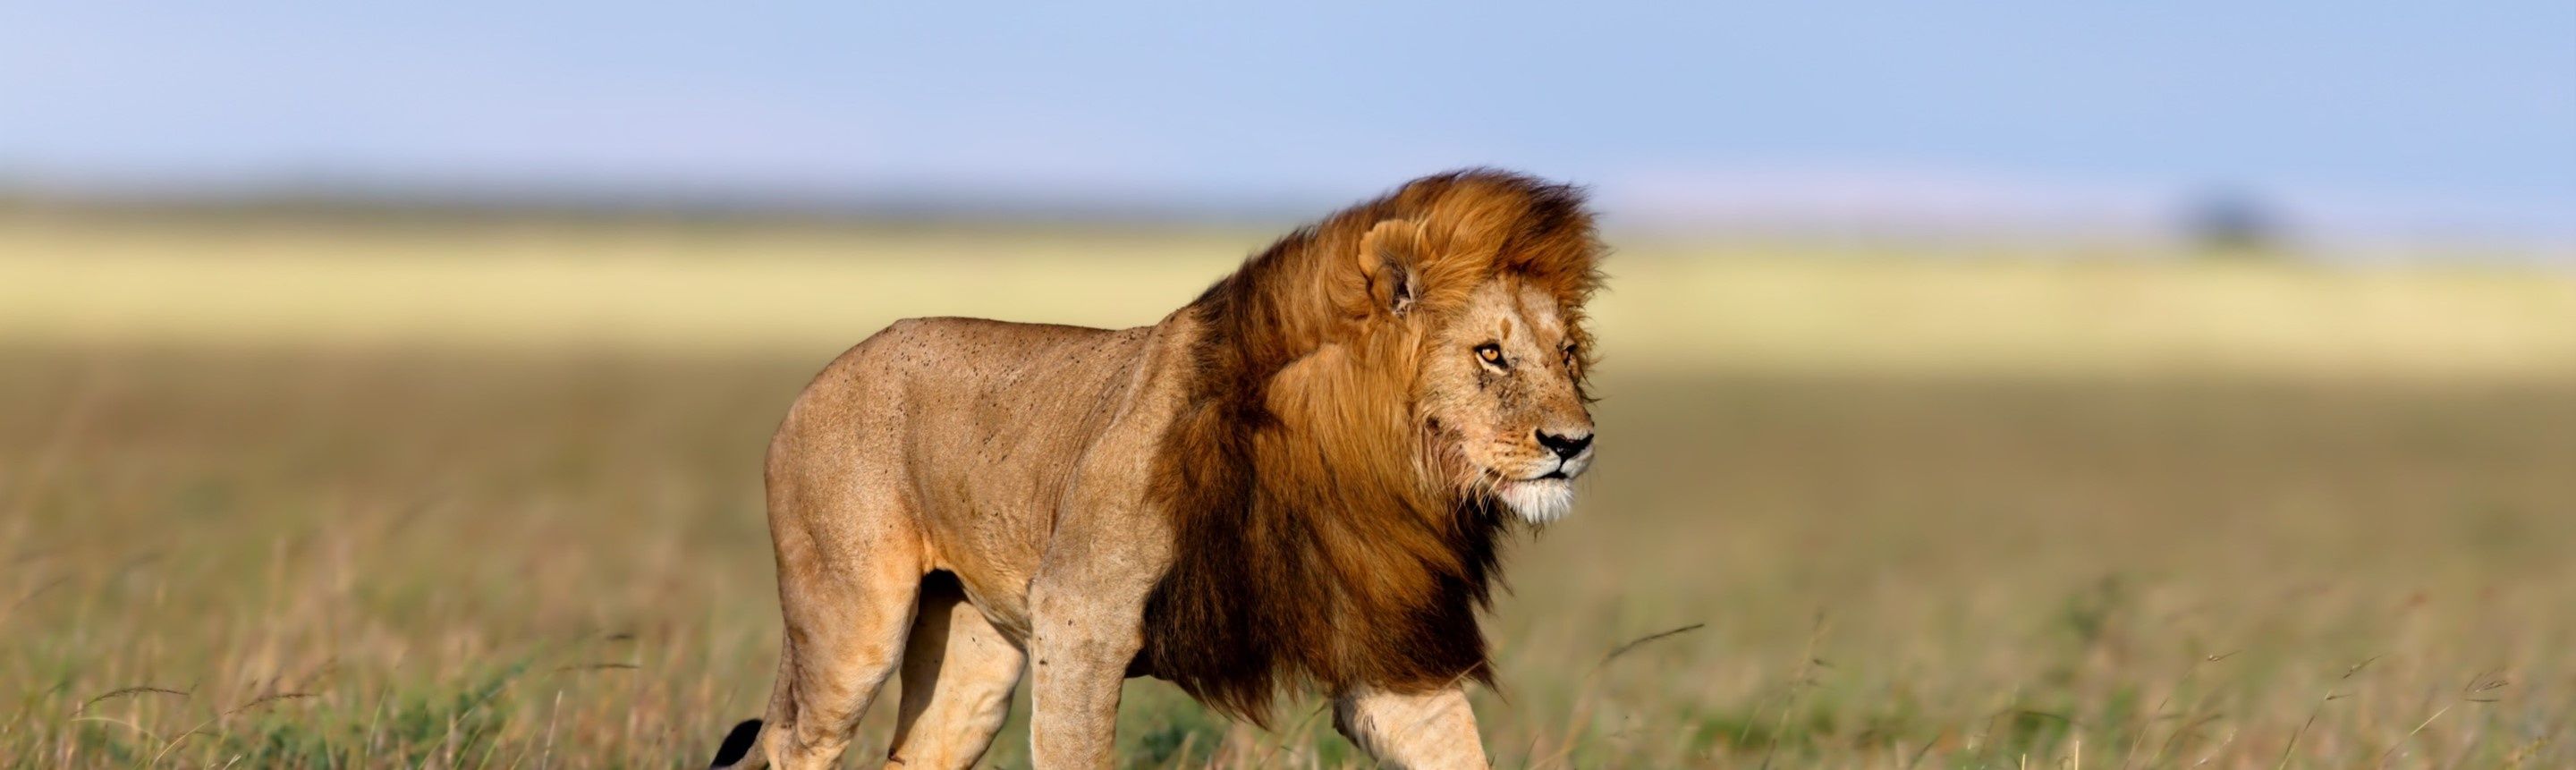 Lion guide: species facts and where they live in the wild - Discover  Wildlife